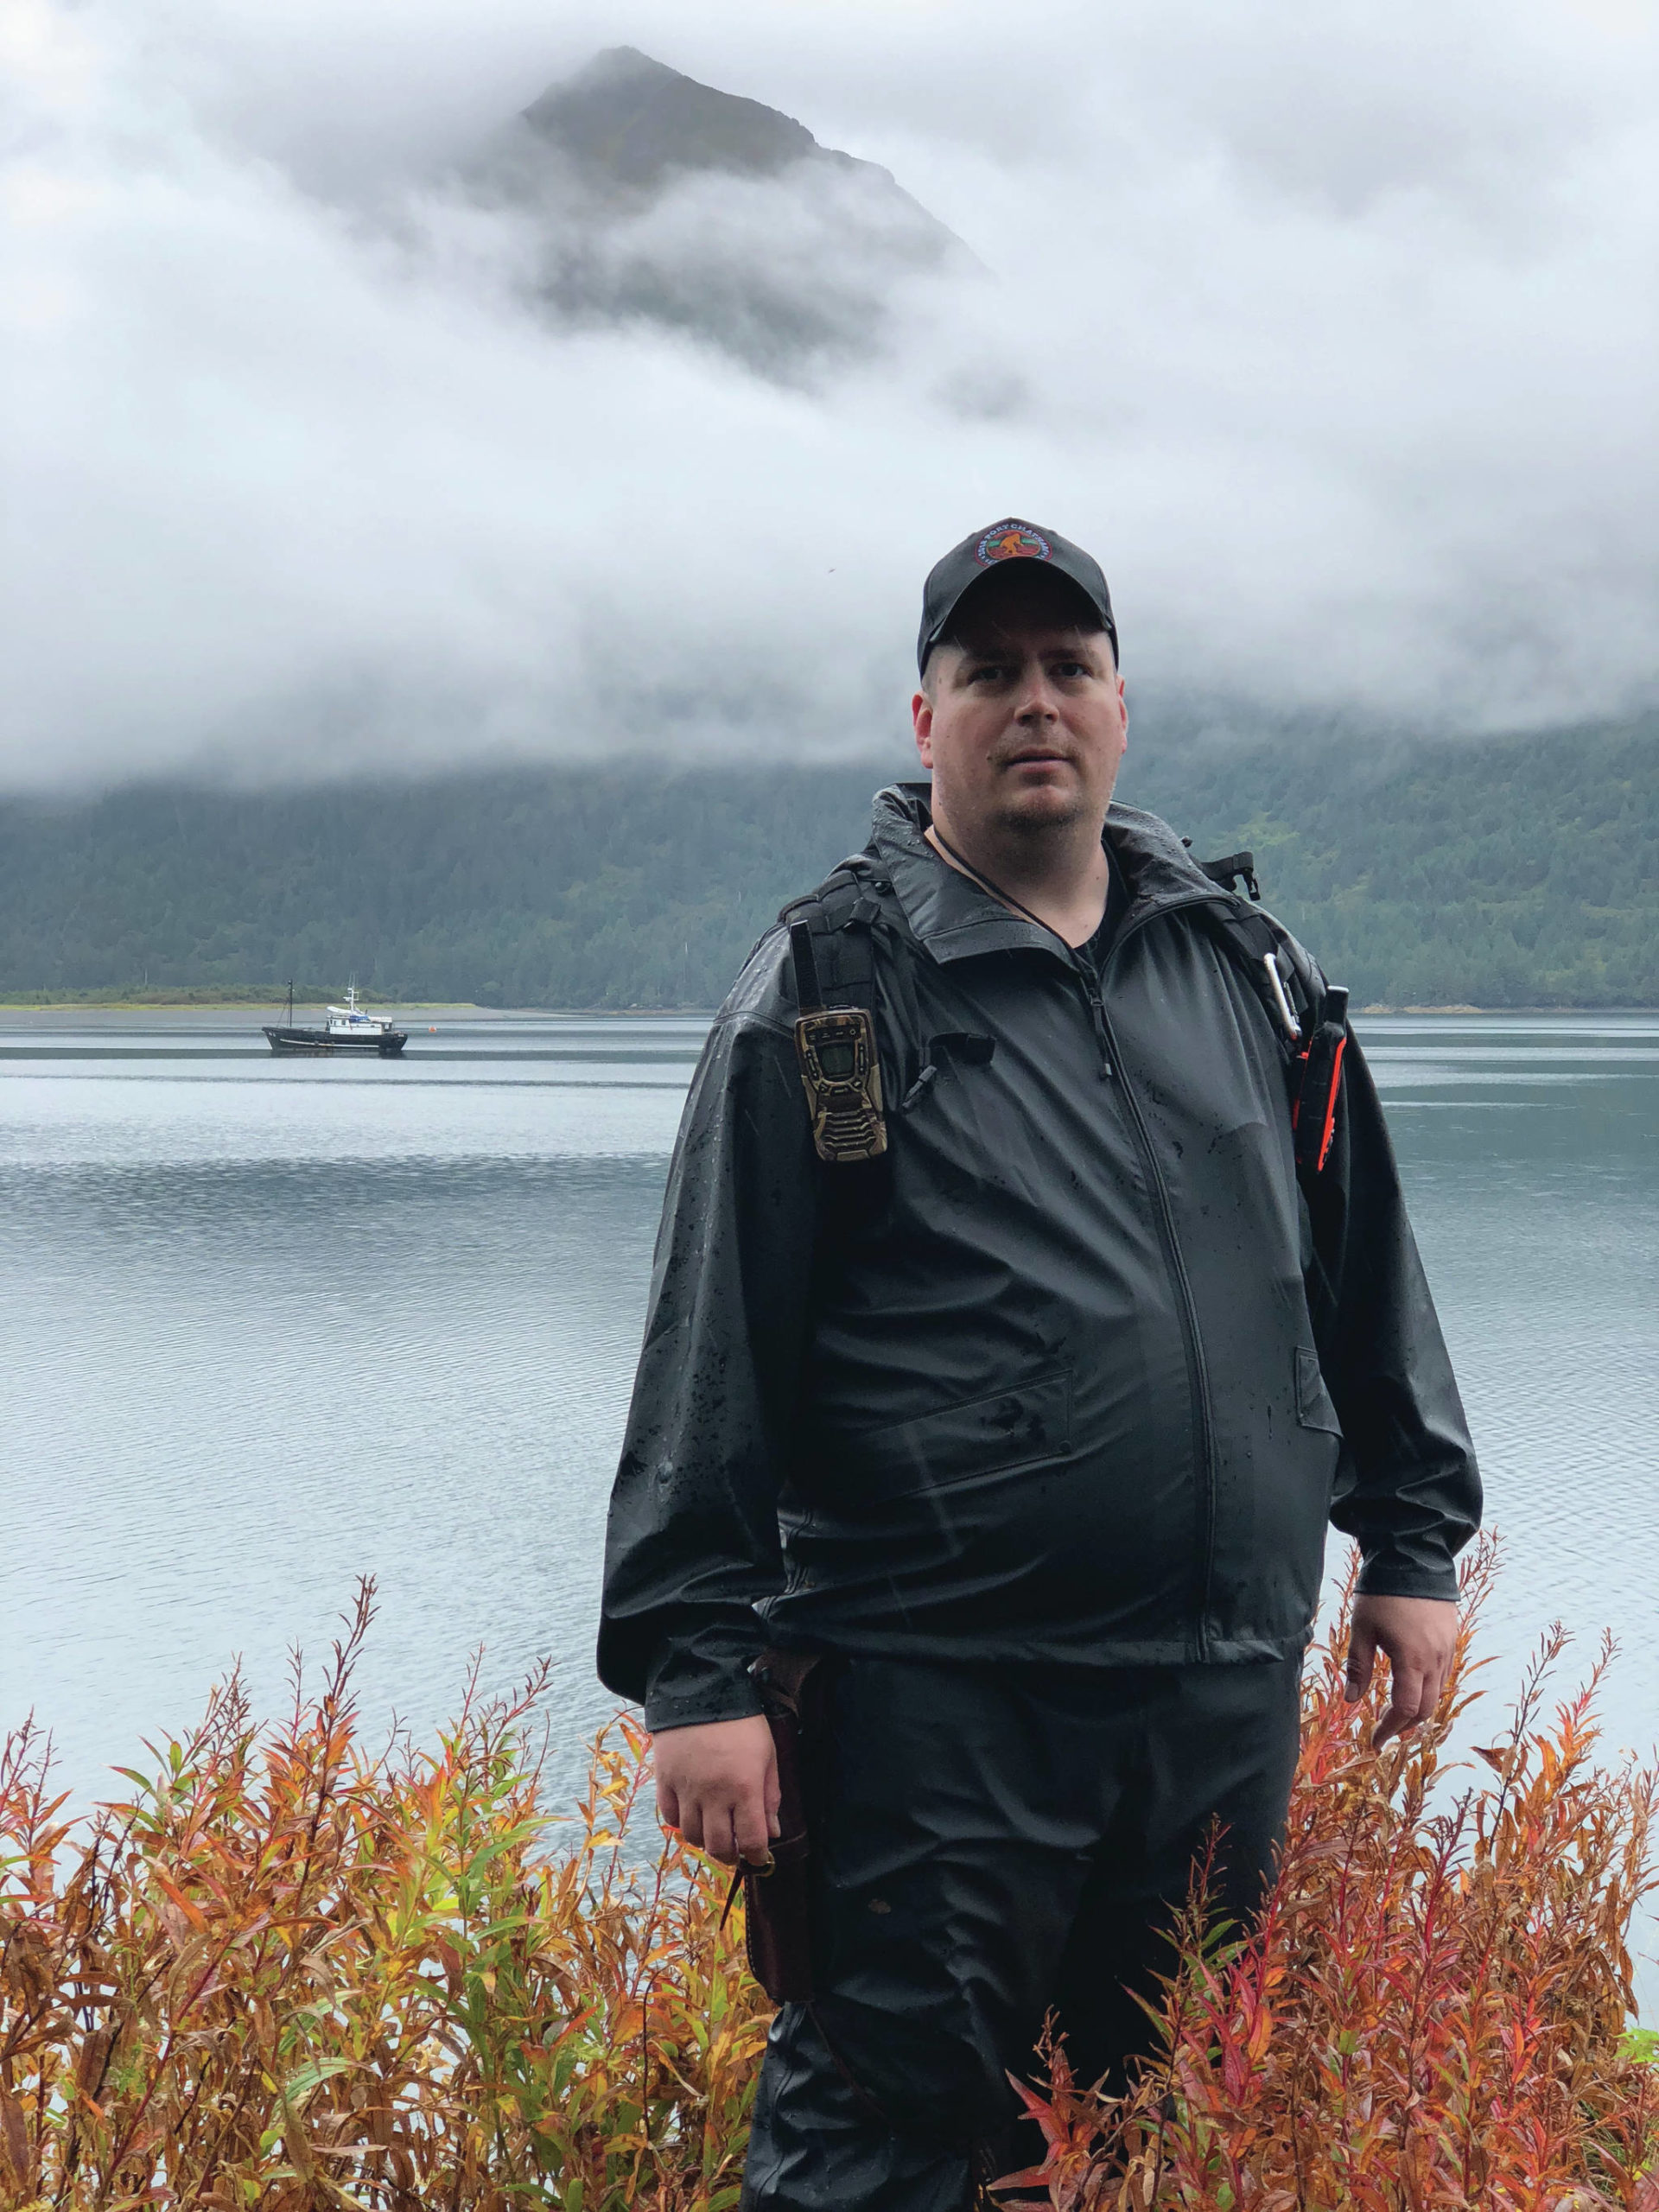 Larry Baxter of Homer was in Port Chatham in 2018 as a consultant for Extreme Expeditions Northwest LLC for the filming of the documentary “In Search of Port Chatham Hairy Man.” Travel to and from Homer was aboard the Homer-based research vessel Puk-Uk. Photo provided by Larry Baxter.